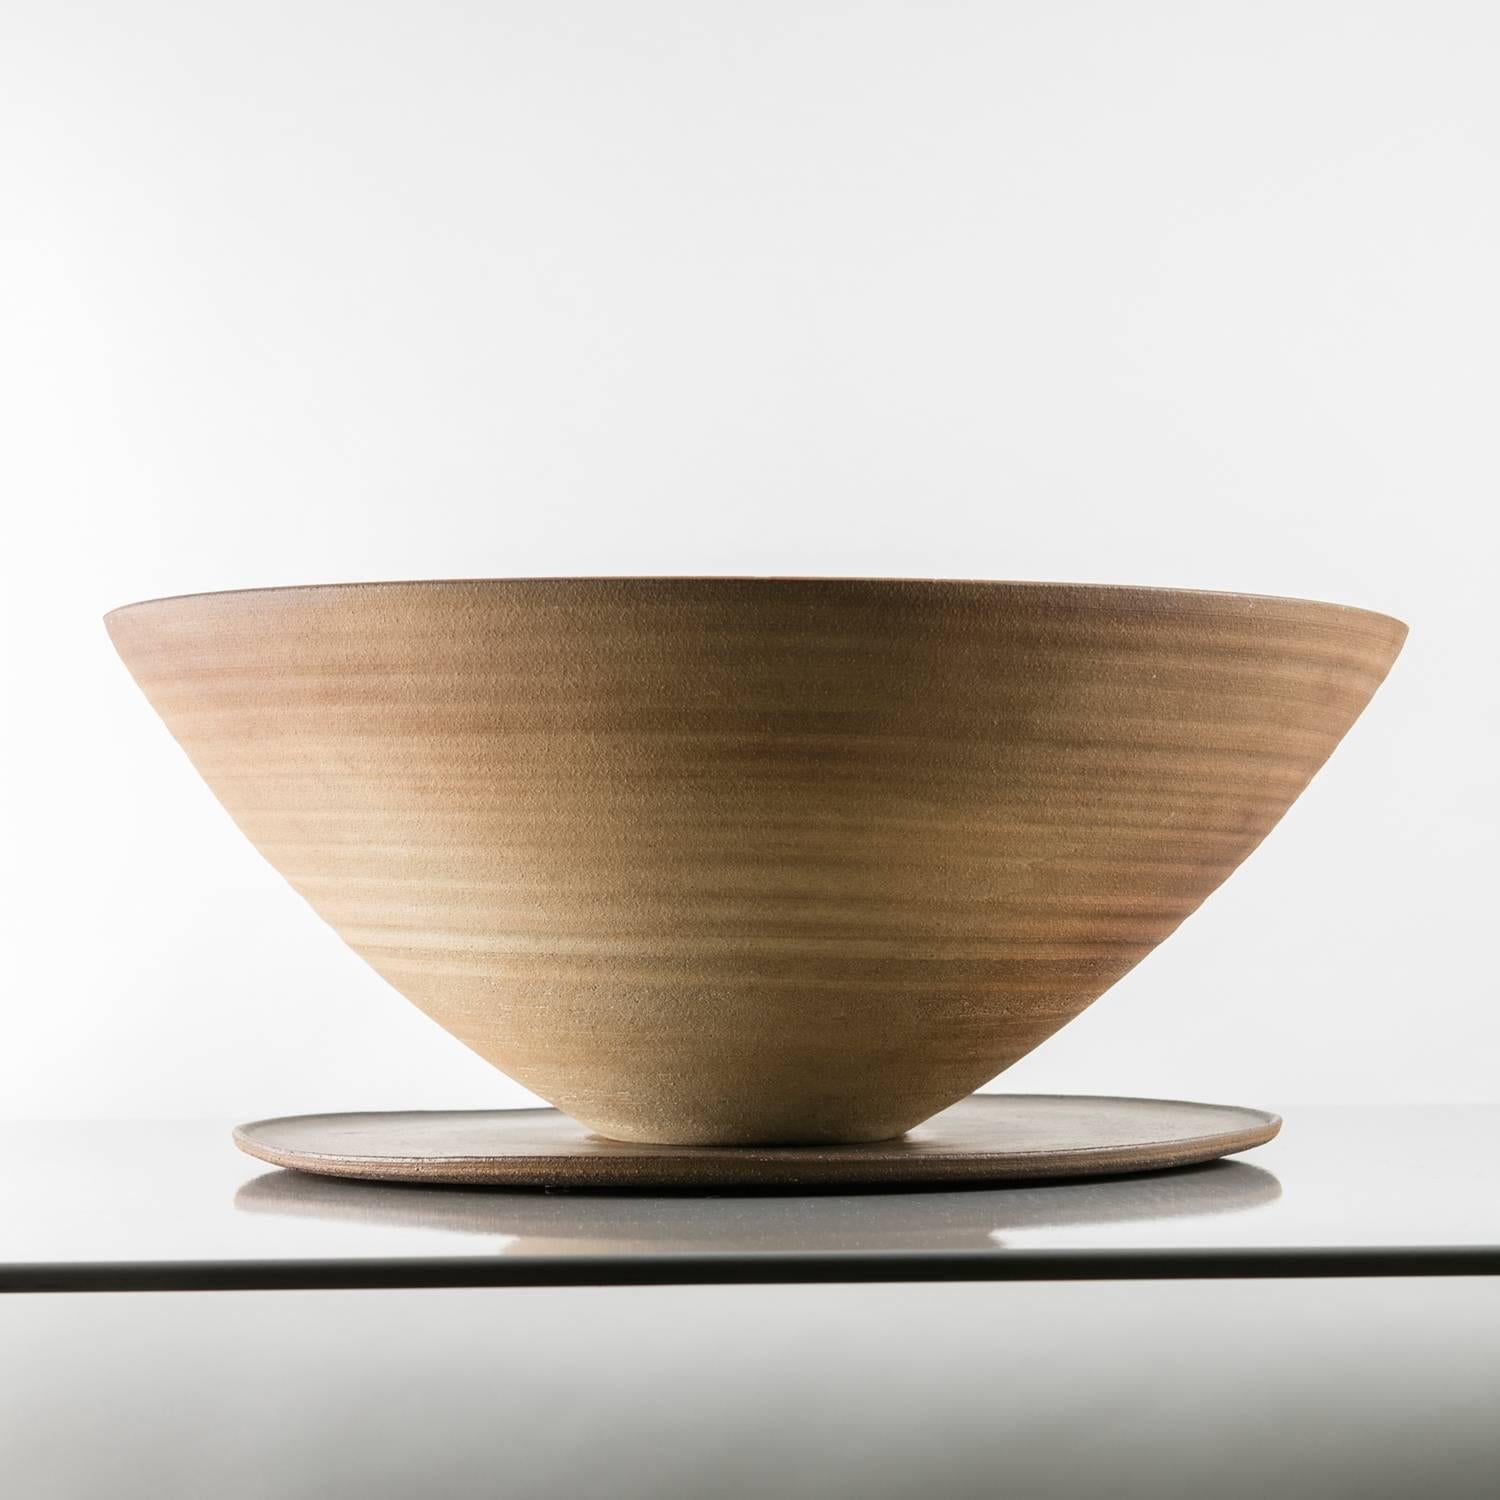 Remarkable stoneware centerpiece by Nanni Valentini for Ceramica Arcore.
The set is composed by the large thin bowl and the big round plate.
Both pieces can be used separately.